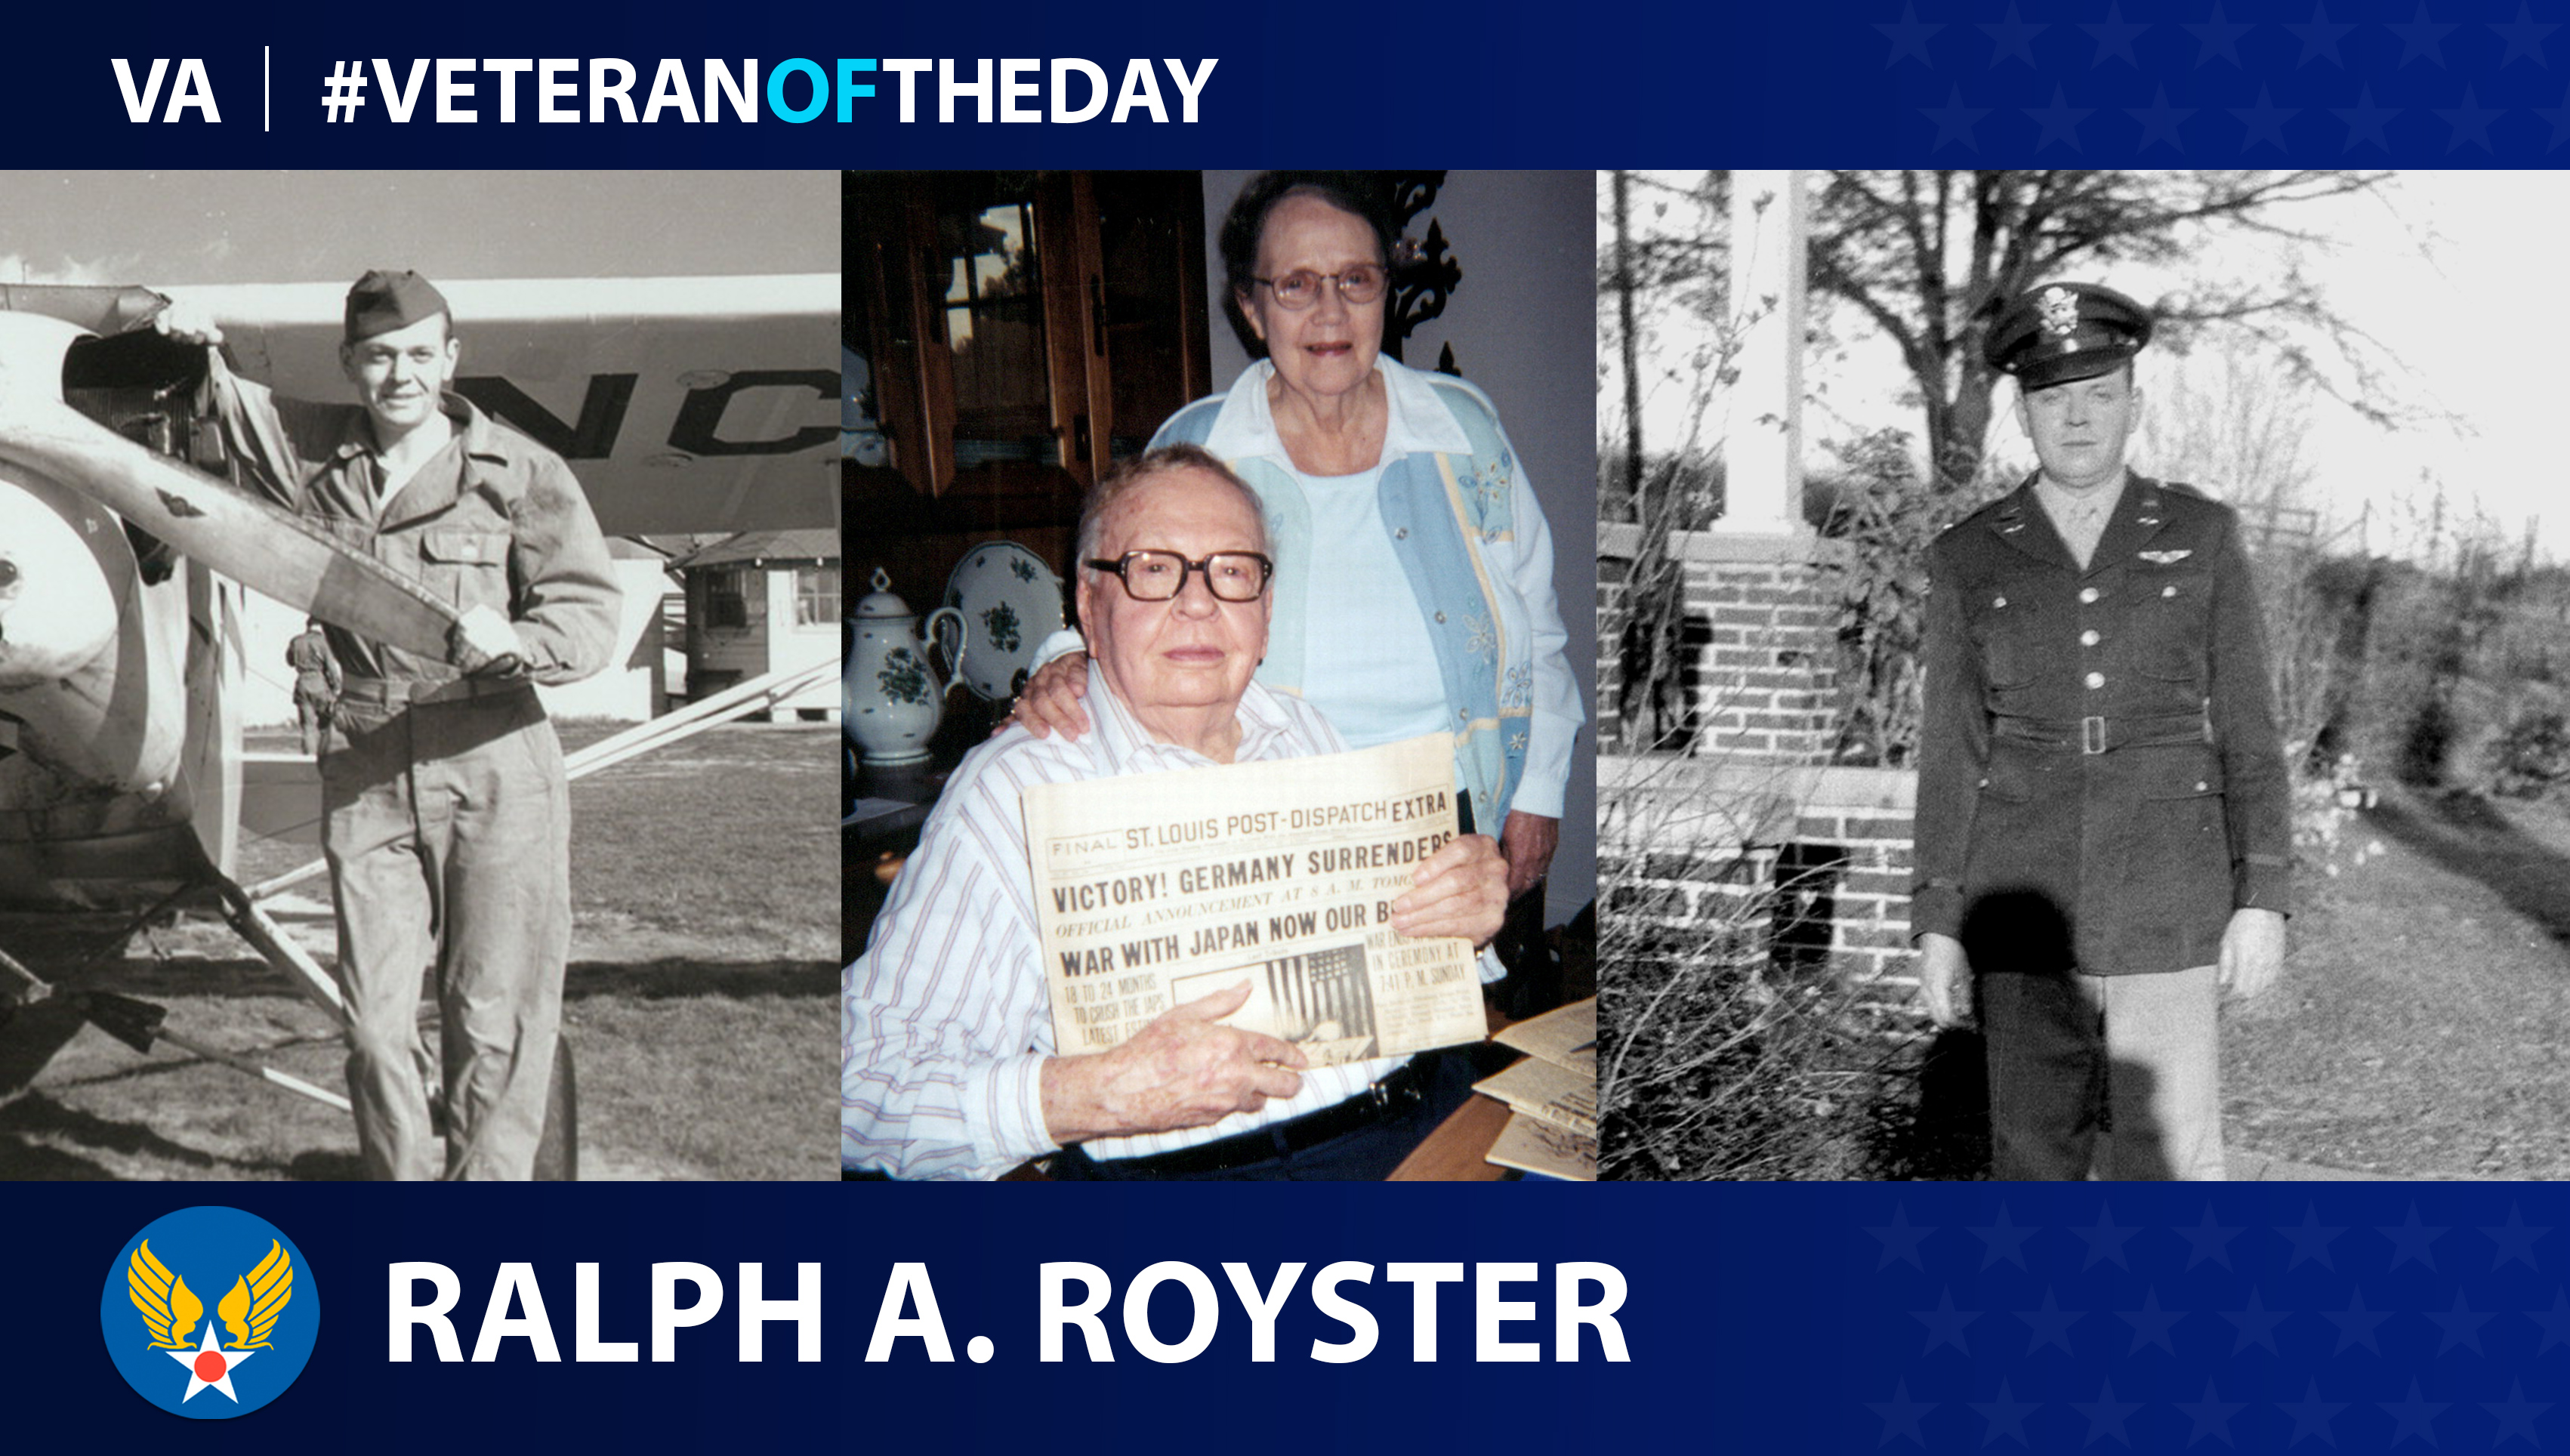 Army Air Forces Veteran Ralph Roy Royster is today's Veteran of the day.